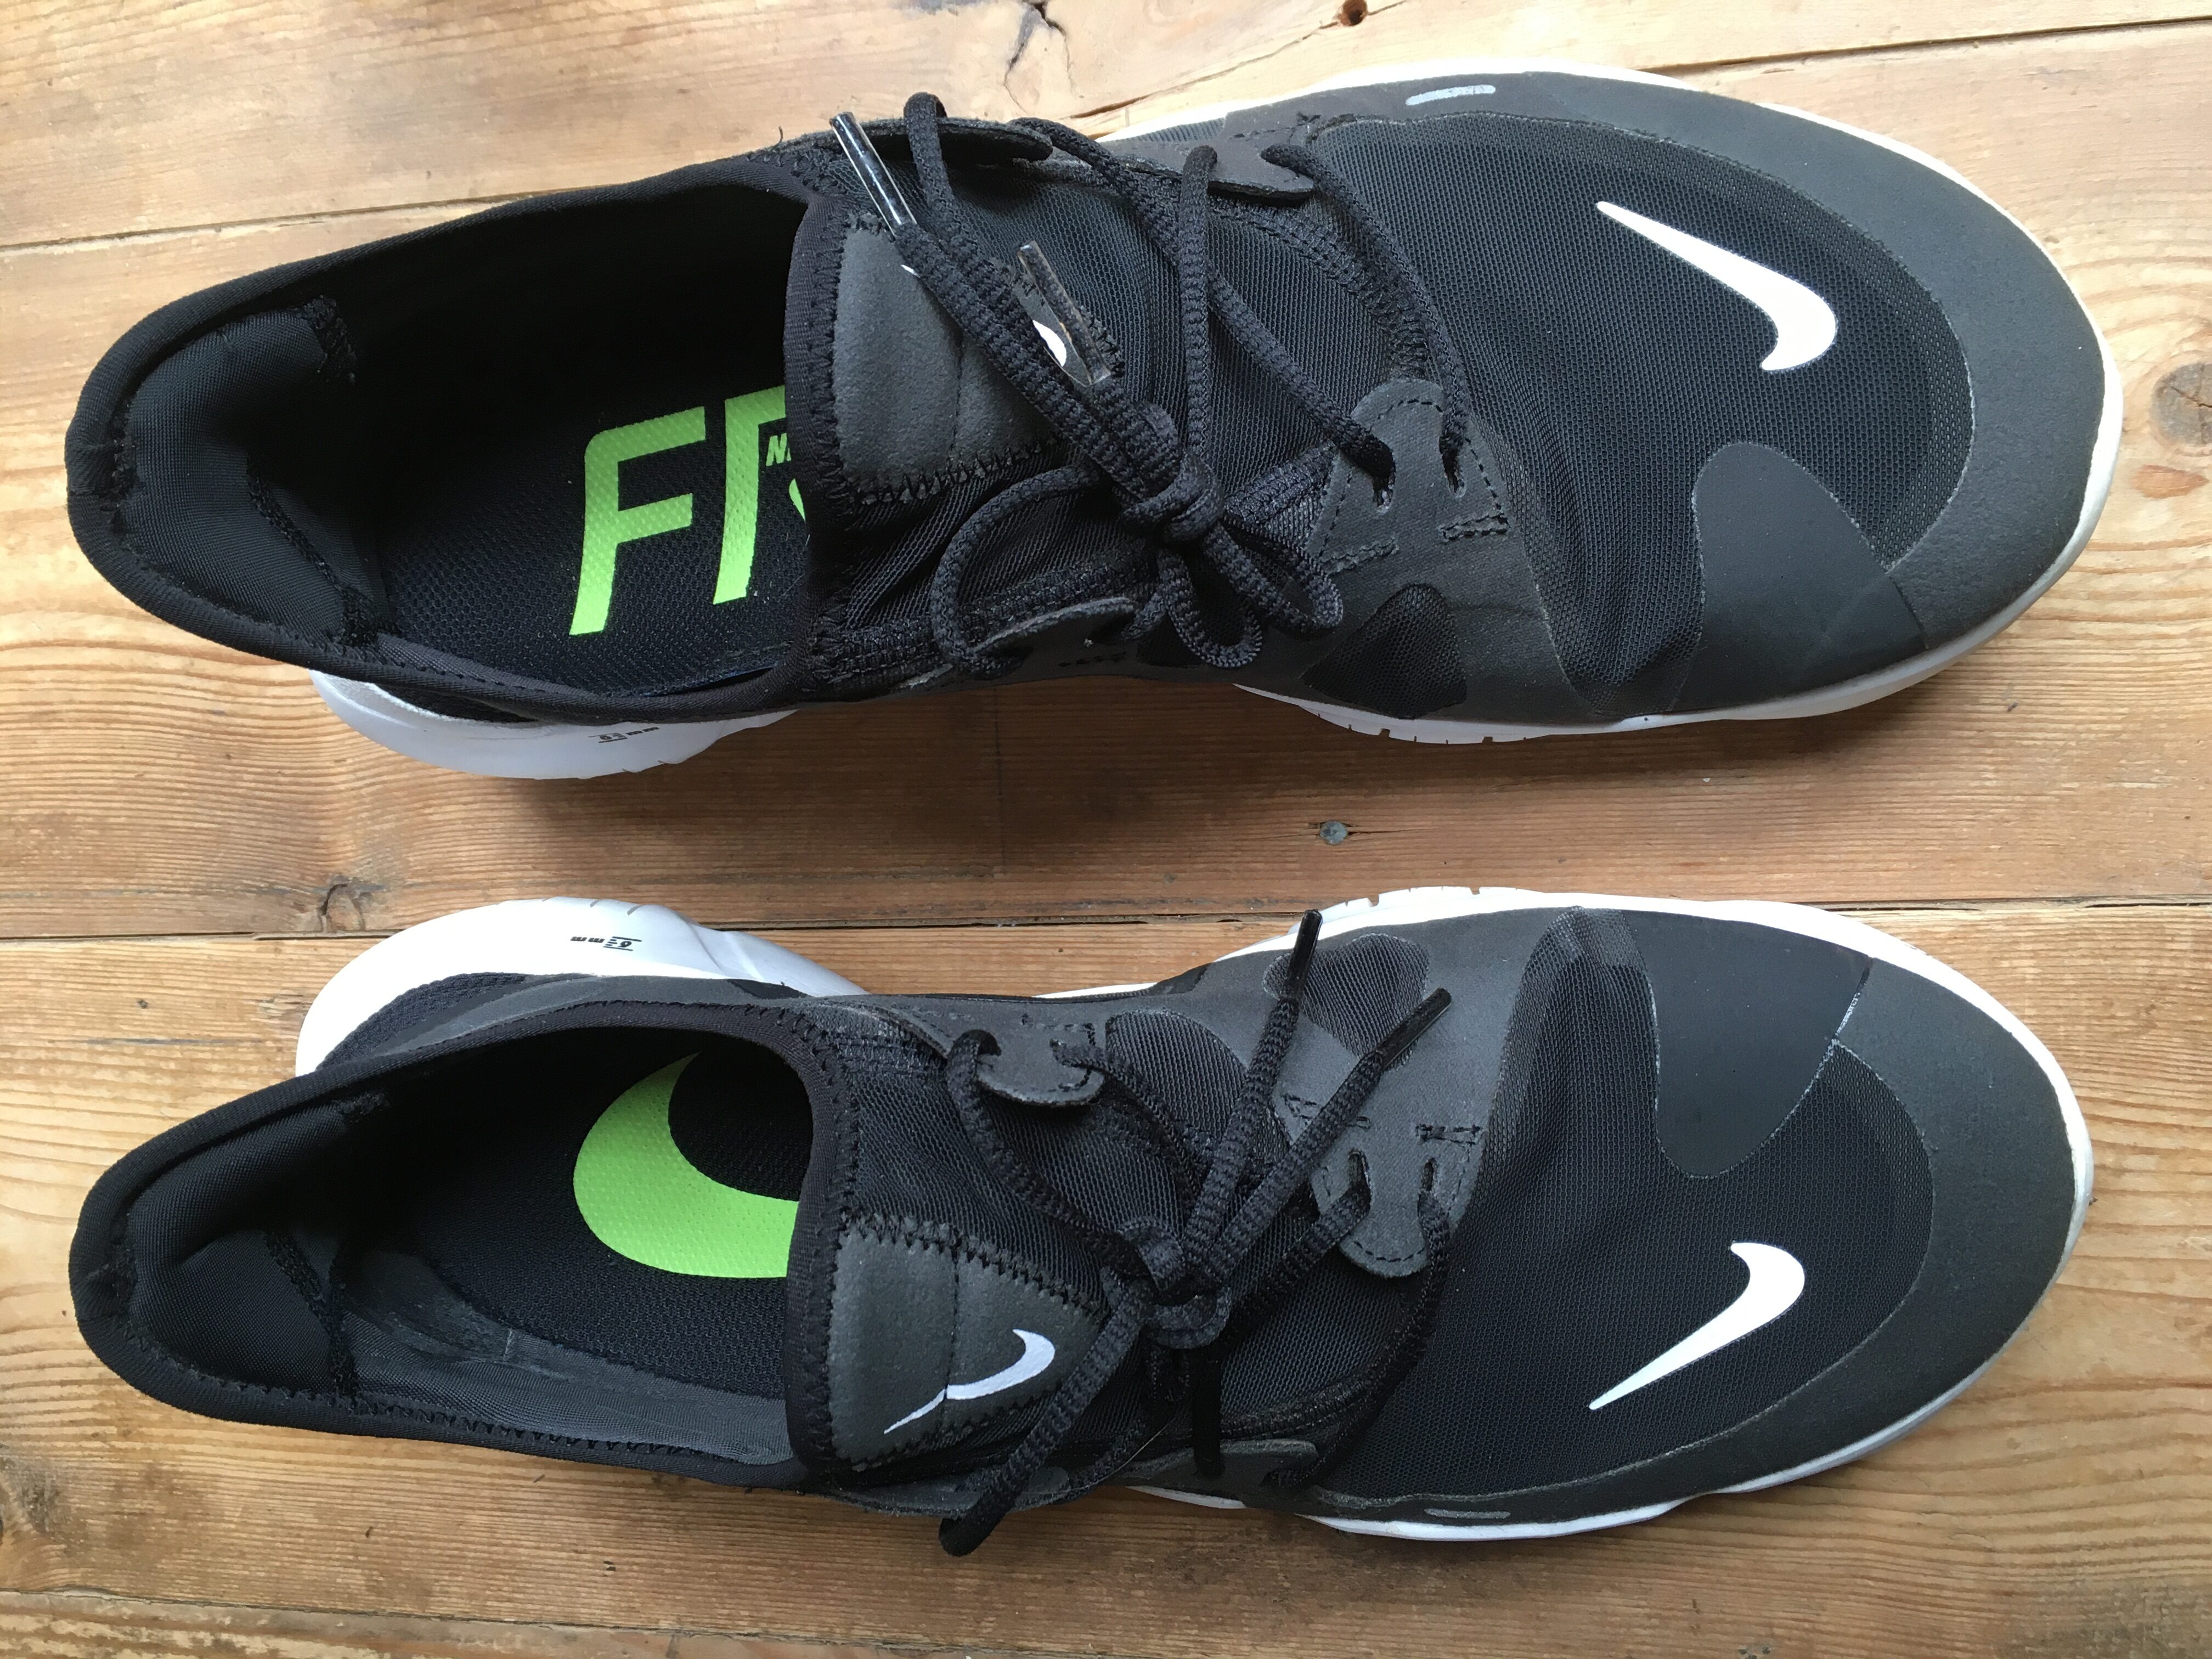 Nike Free RN 5.0 2020 - Running Shoe Review - Better Than Sorry